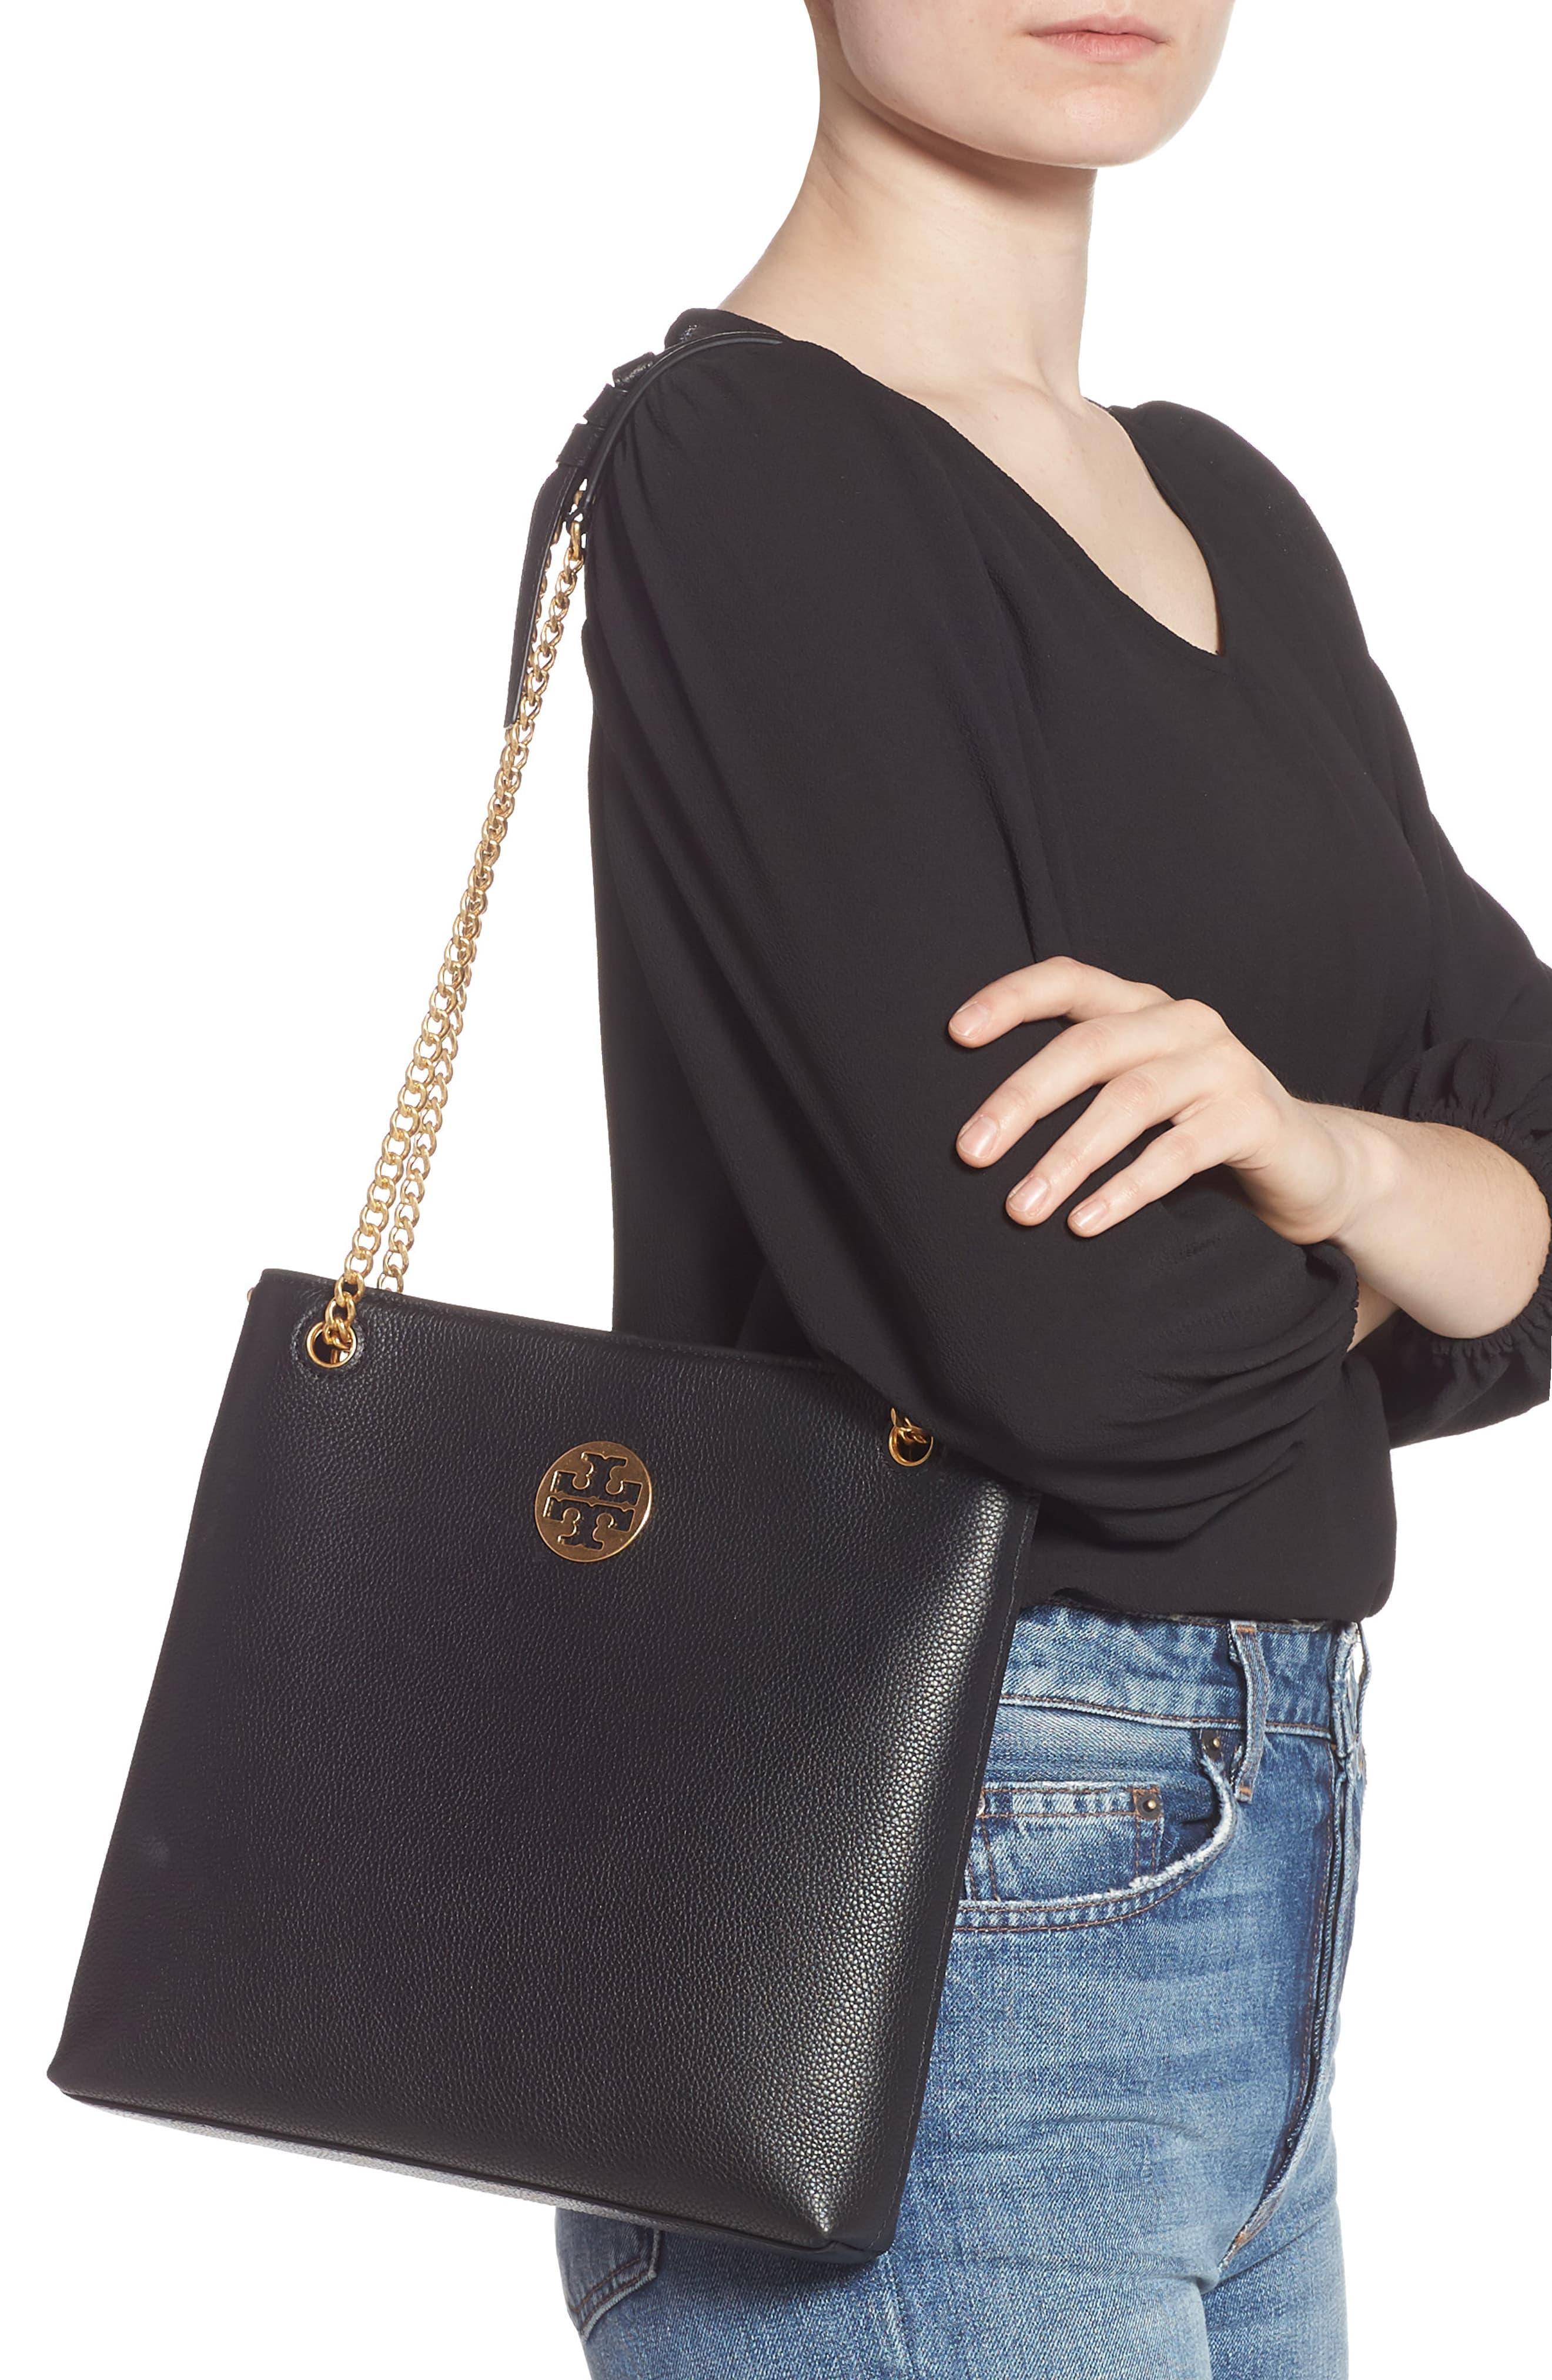 Tory Burch Everly Leather Swingpack in 